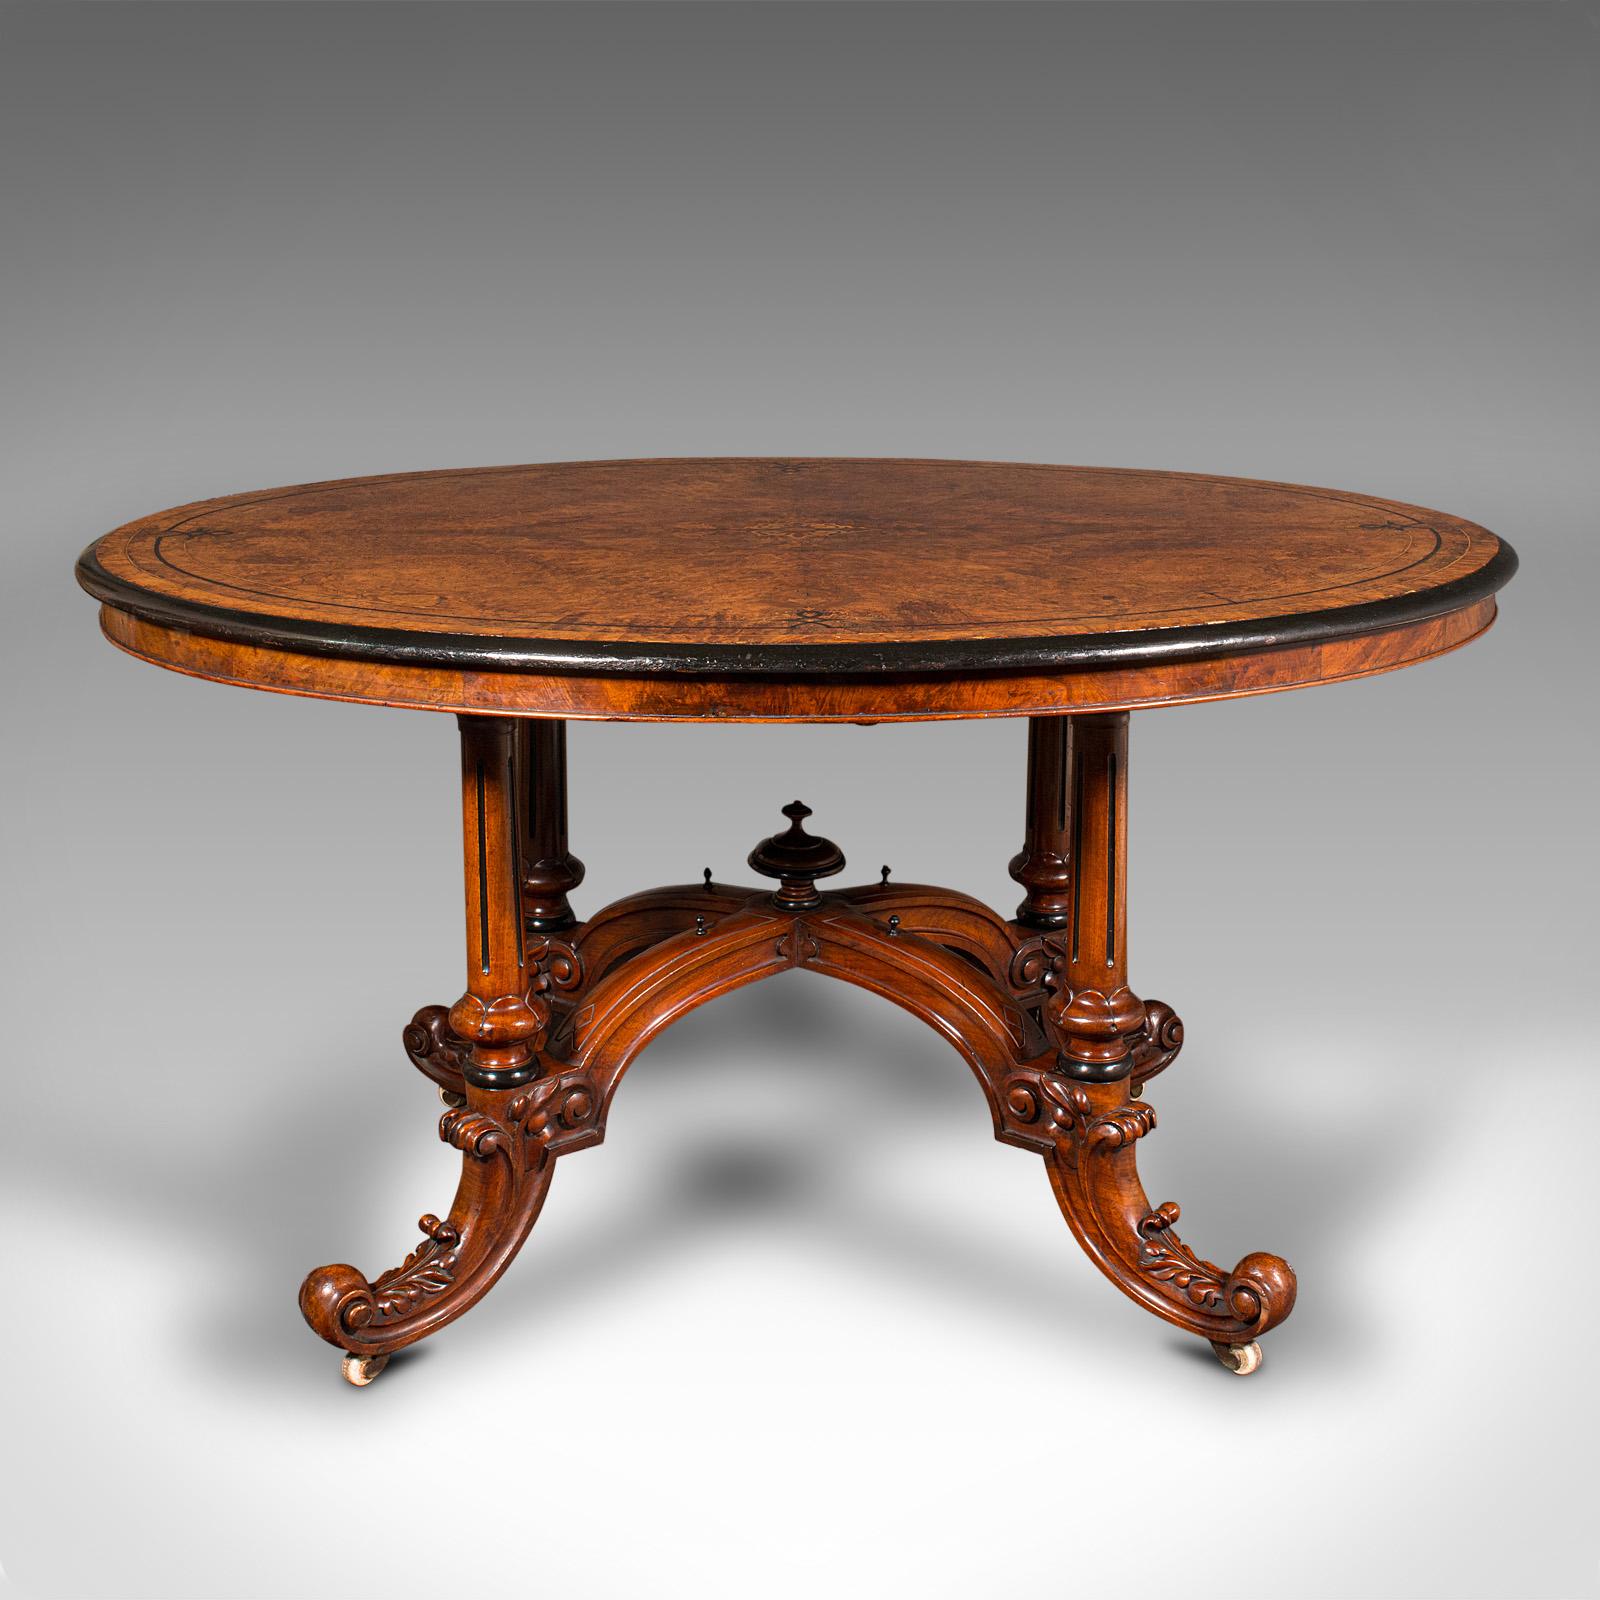 This is an antique oval Looe table. An English, burr walnut and boxwood inlaid 4-seat centrepiece table, dating to the early Victorian period, circa 1840.

Exceptional craftsmanship and figuring - a table of fine distinction
Displaying a desirable